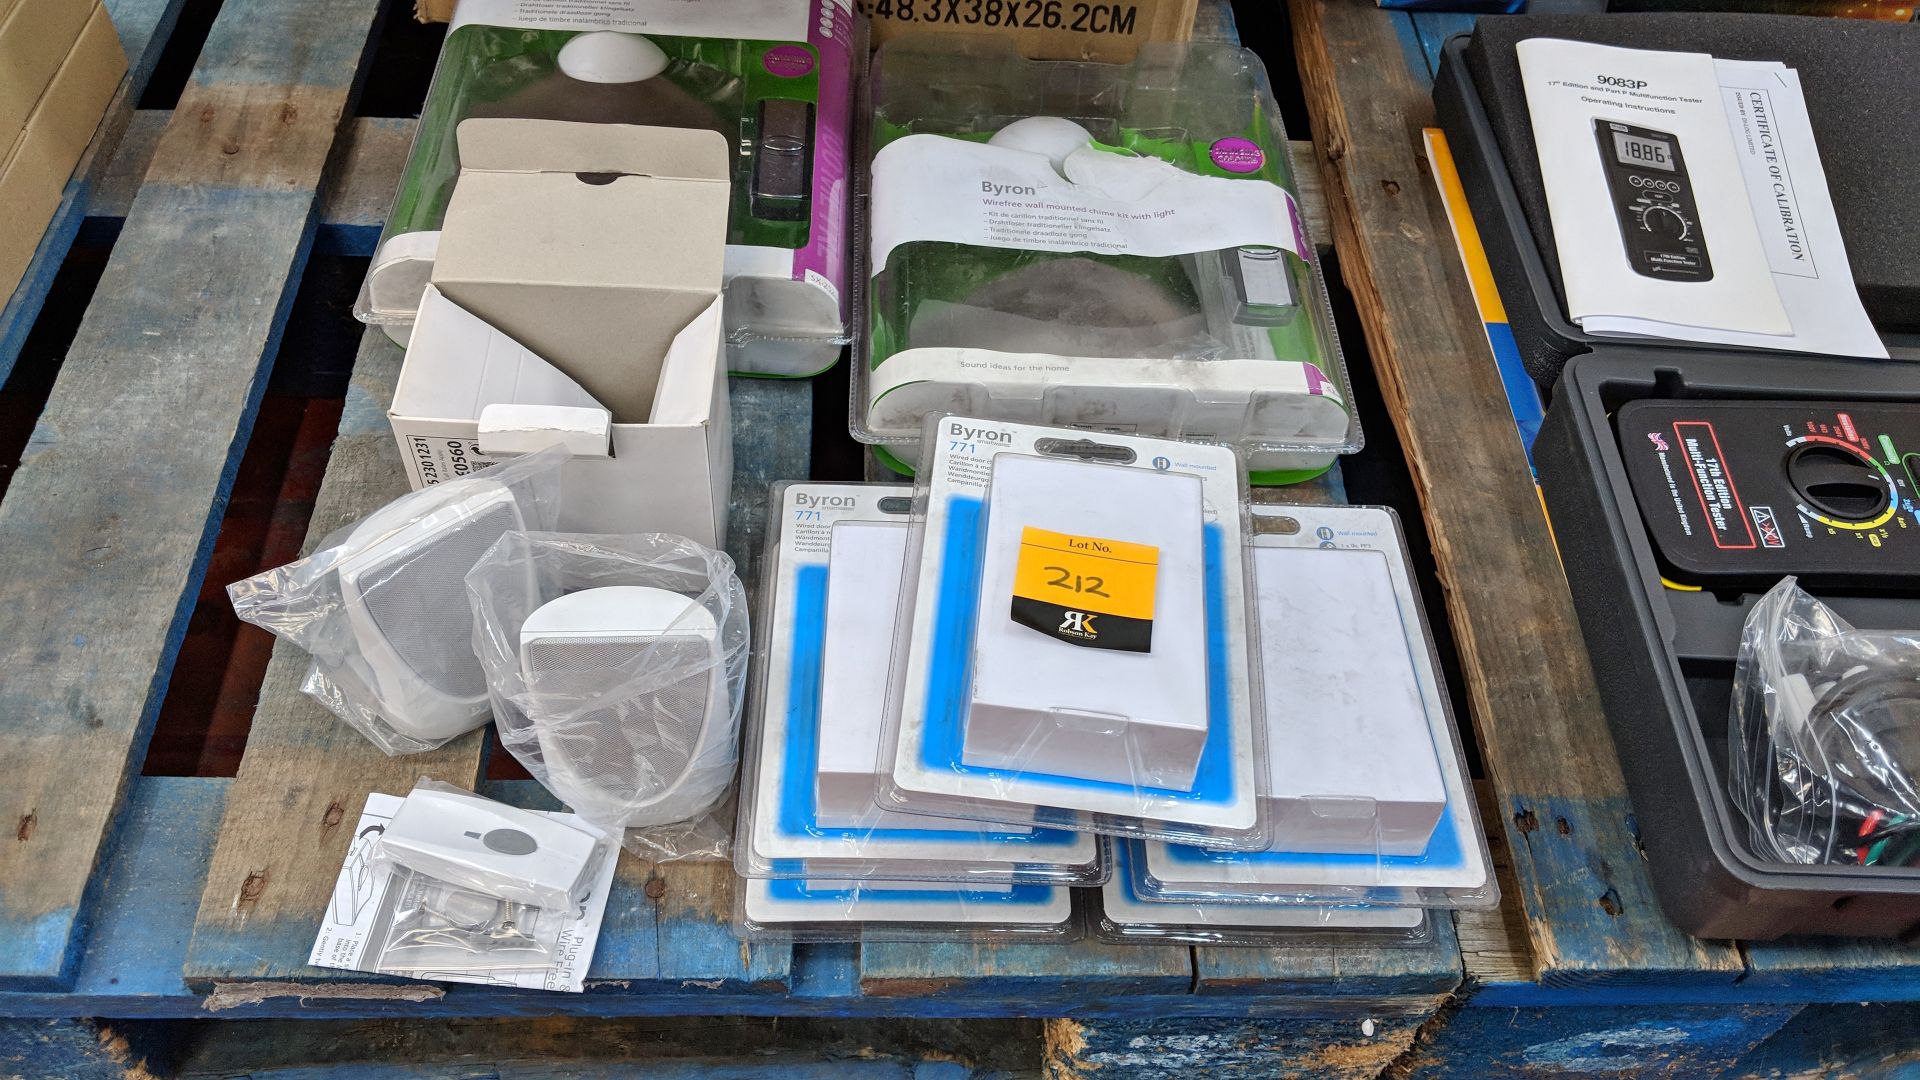 Quantity of Byron wire and wire-free chime related items - 8 items in total The vast majority of